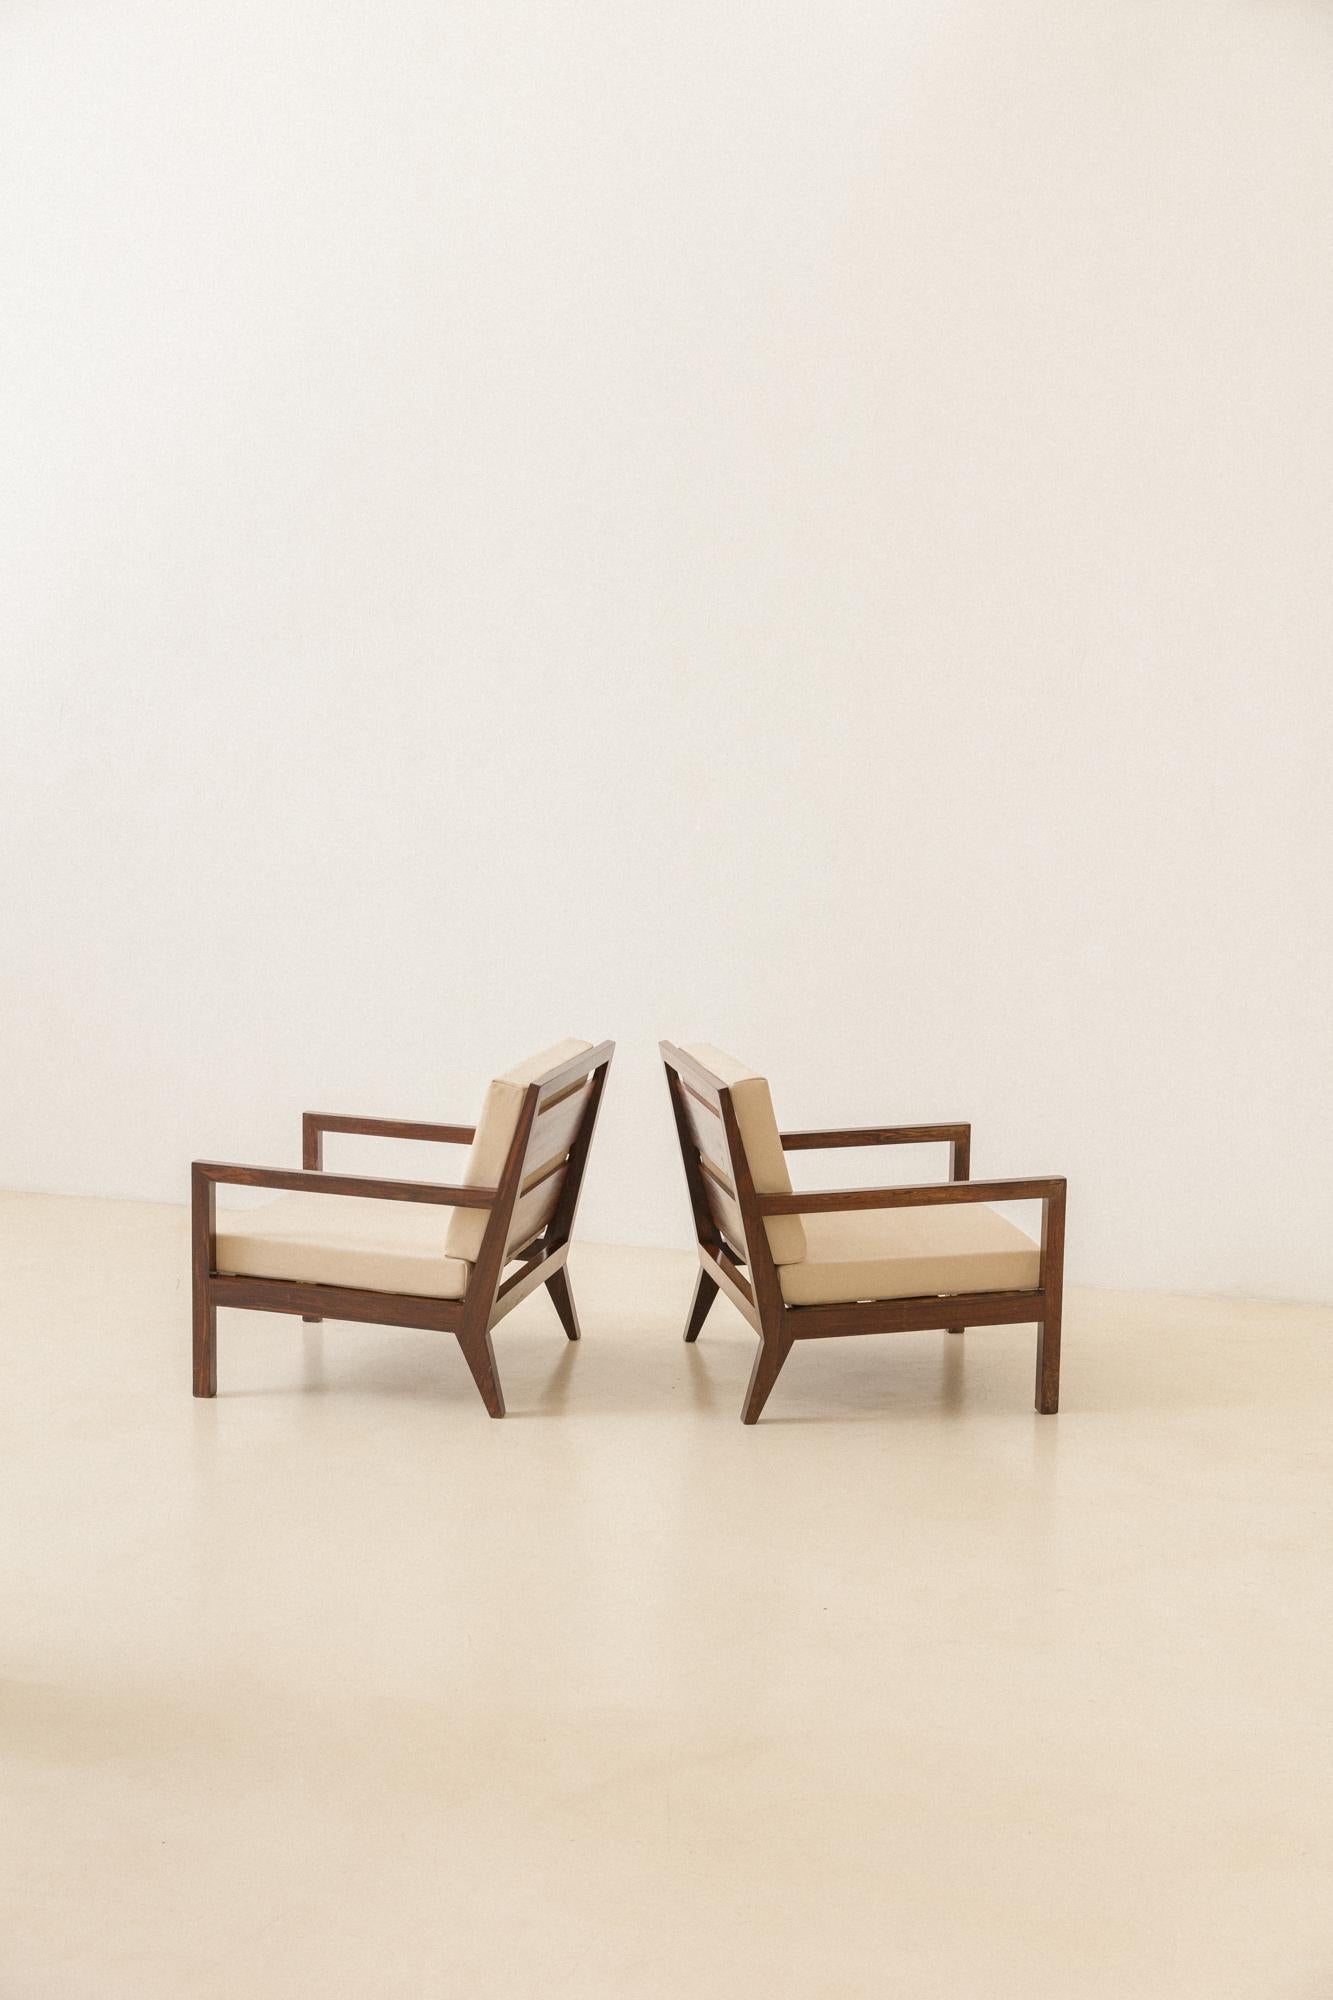 Pair of Brazilian Midcentury Armchairs, Unknown Designer, Solid Rosewood, 1960s For Sale 2